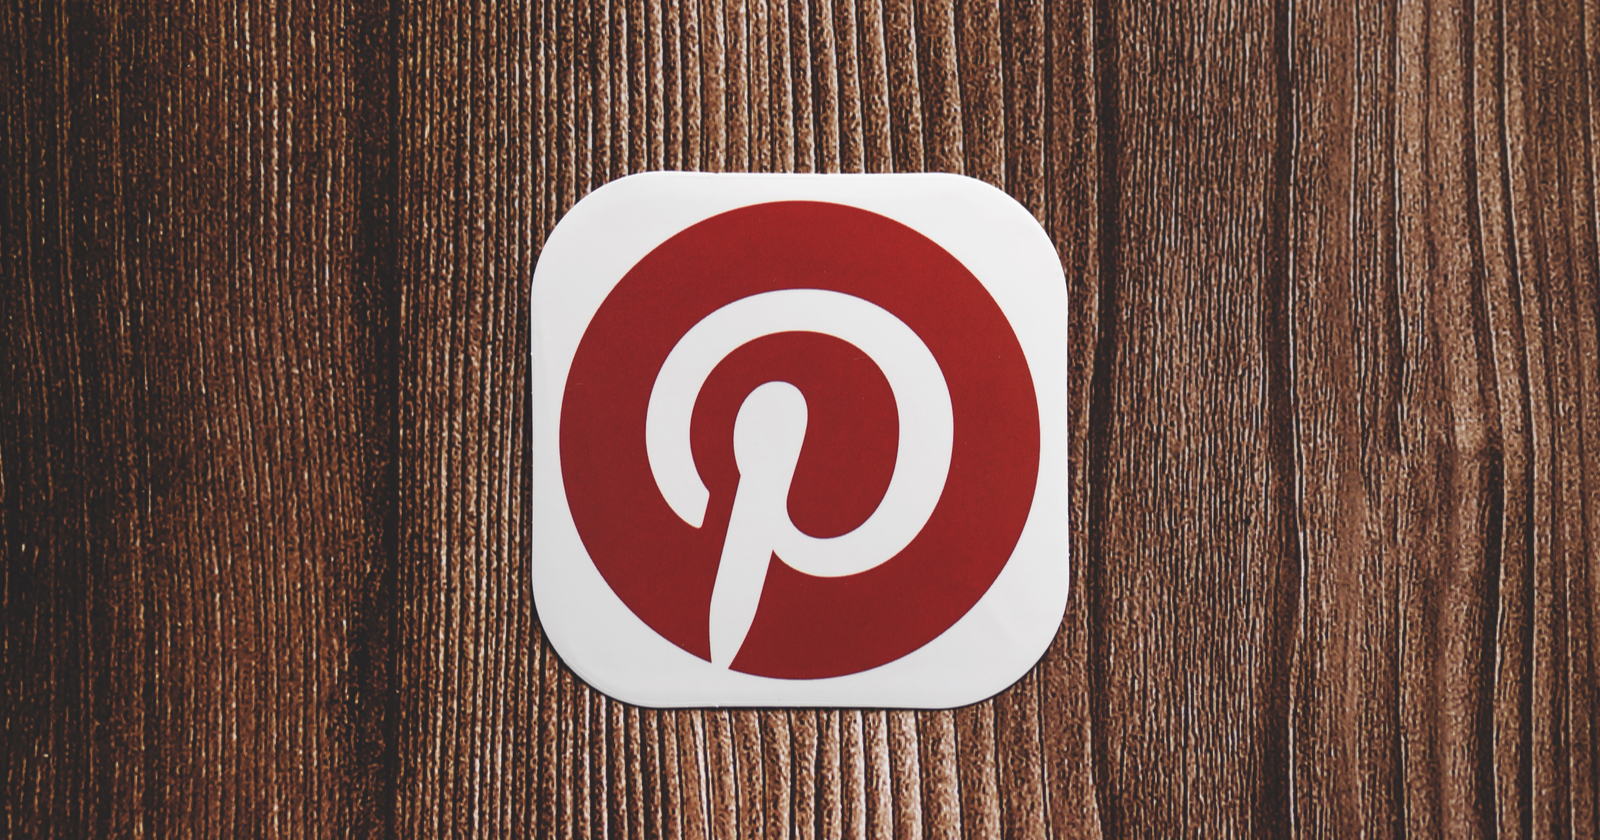 Pinterest Lets Content Owners Control How Their Images Are Used